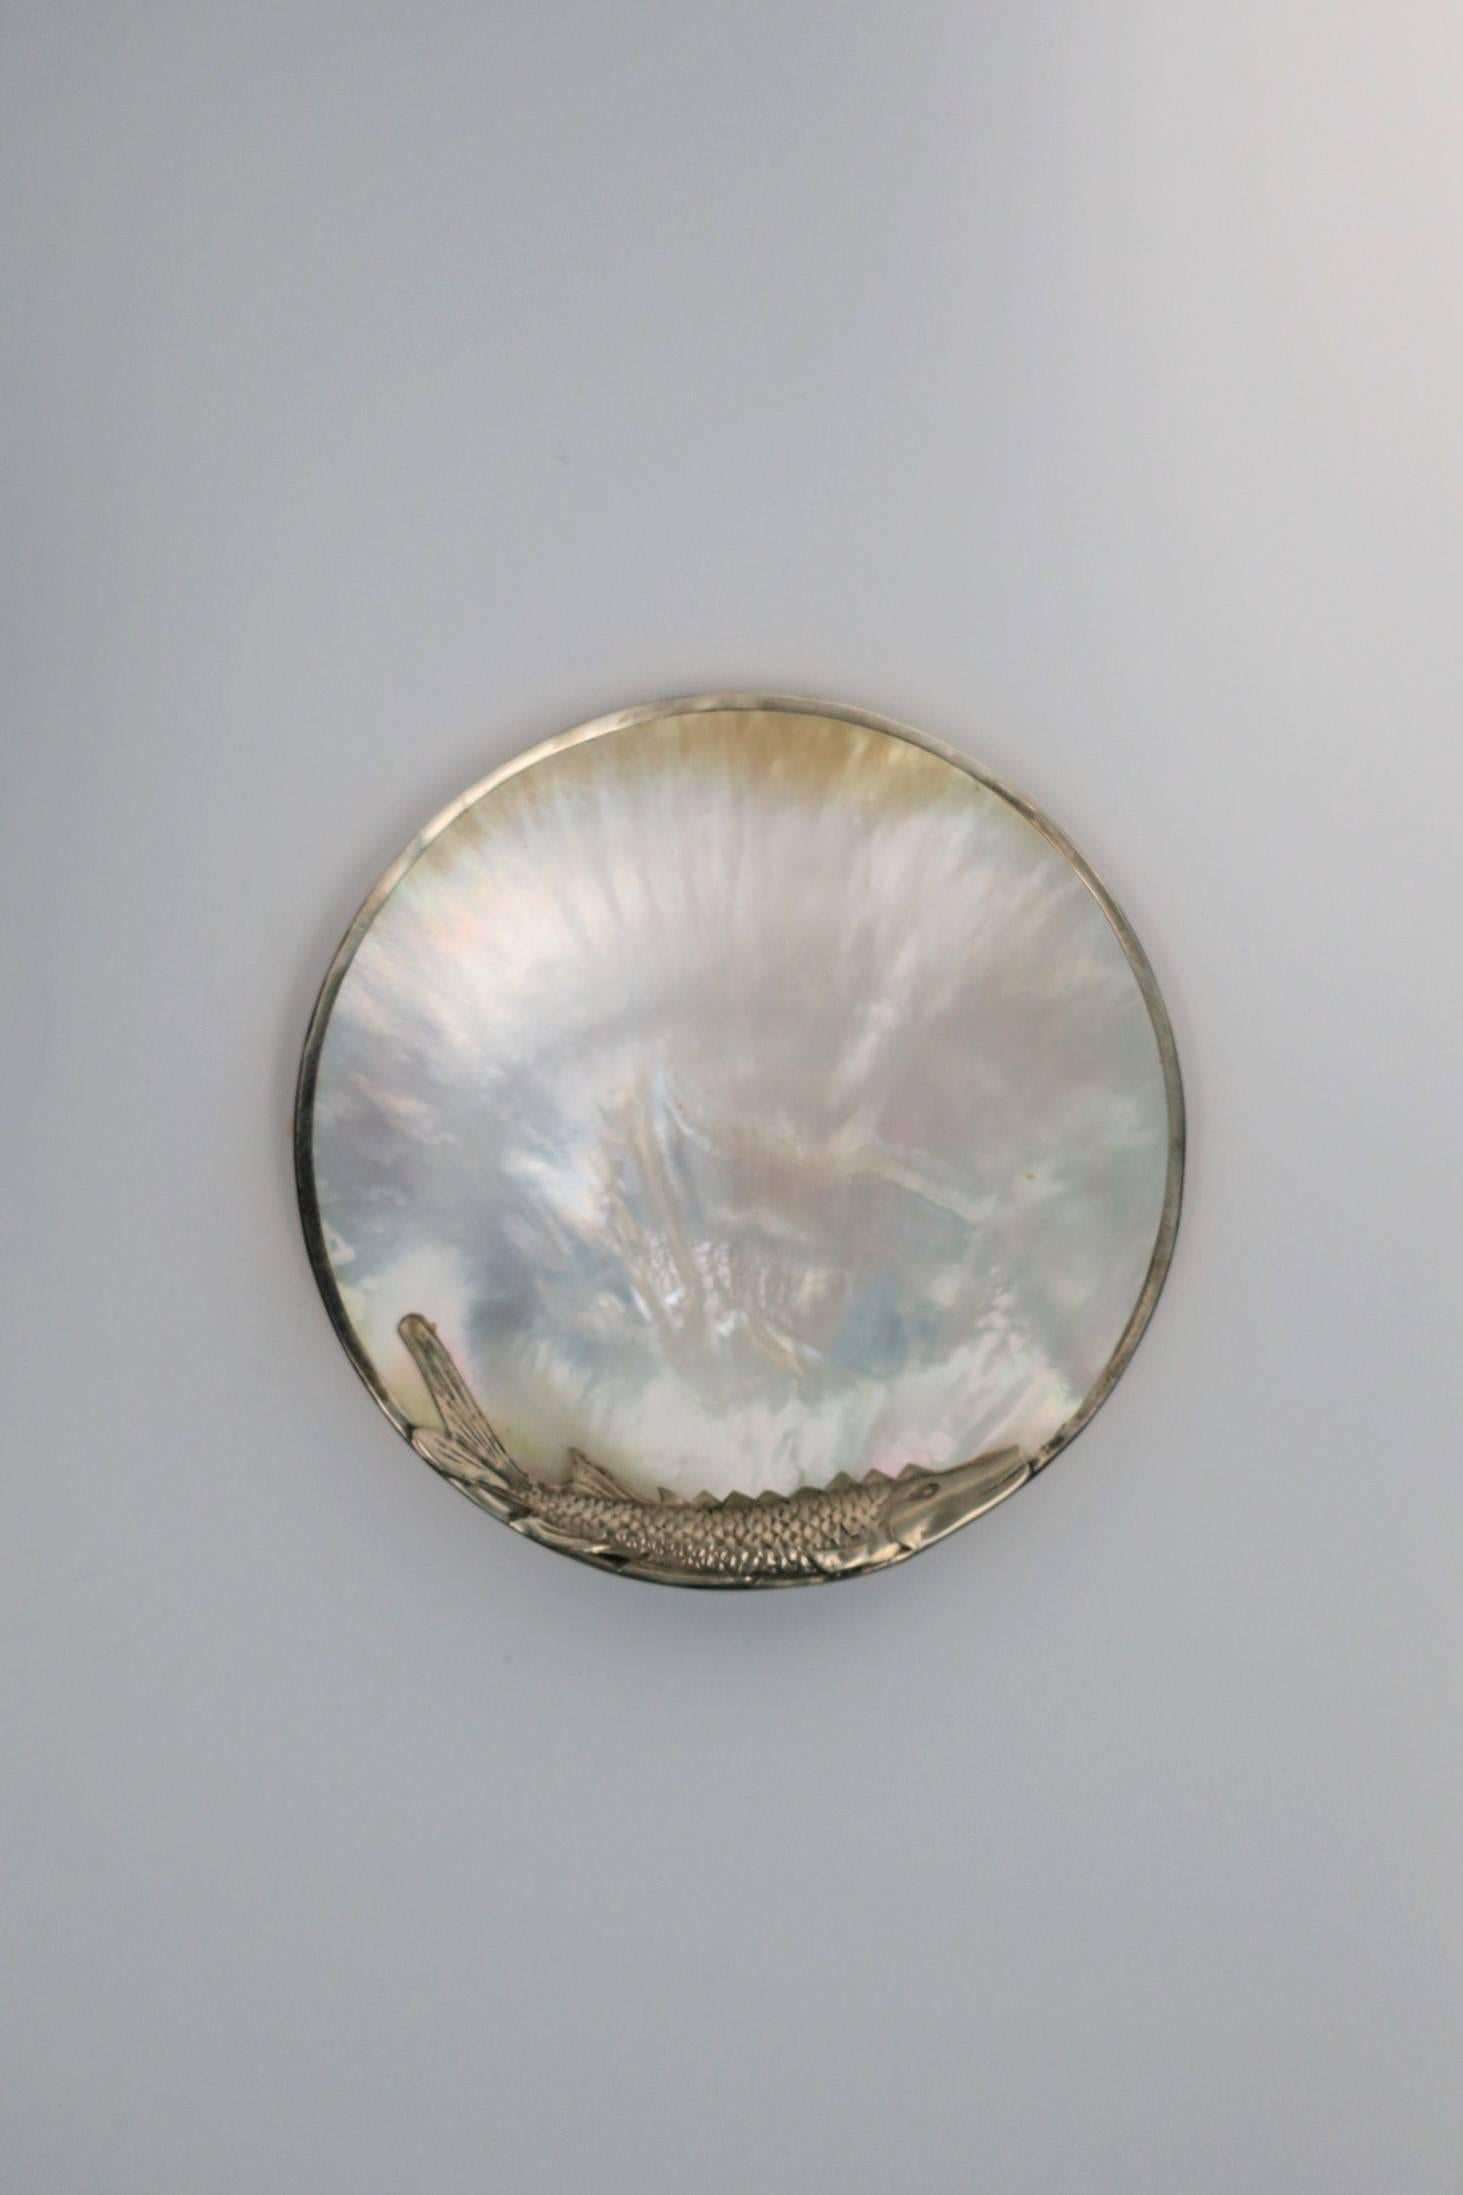 A beautiful vintage Mother-of-Pearl shell with decorative sturgeon fish caviar dish. 

Measures: 5 in. Diameter x 1 in. H

Complimentary front door delivery in New York (Manhattan.) 
Item available here online. By request, item can be made available